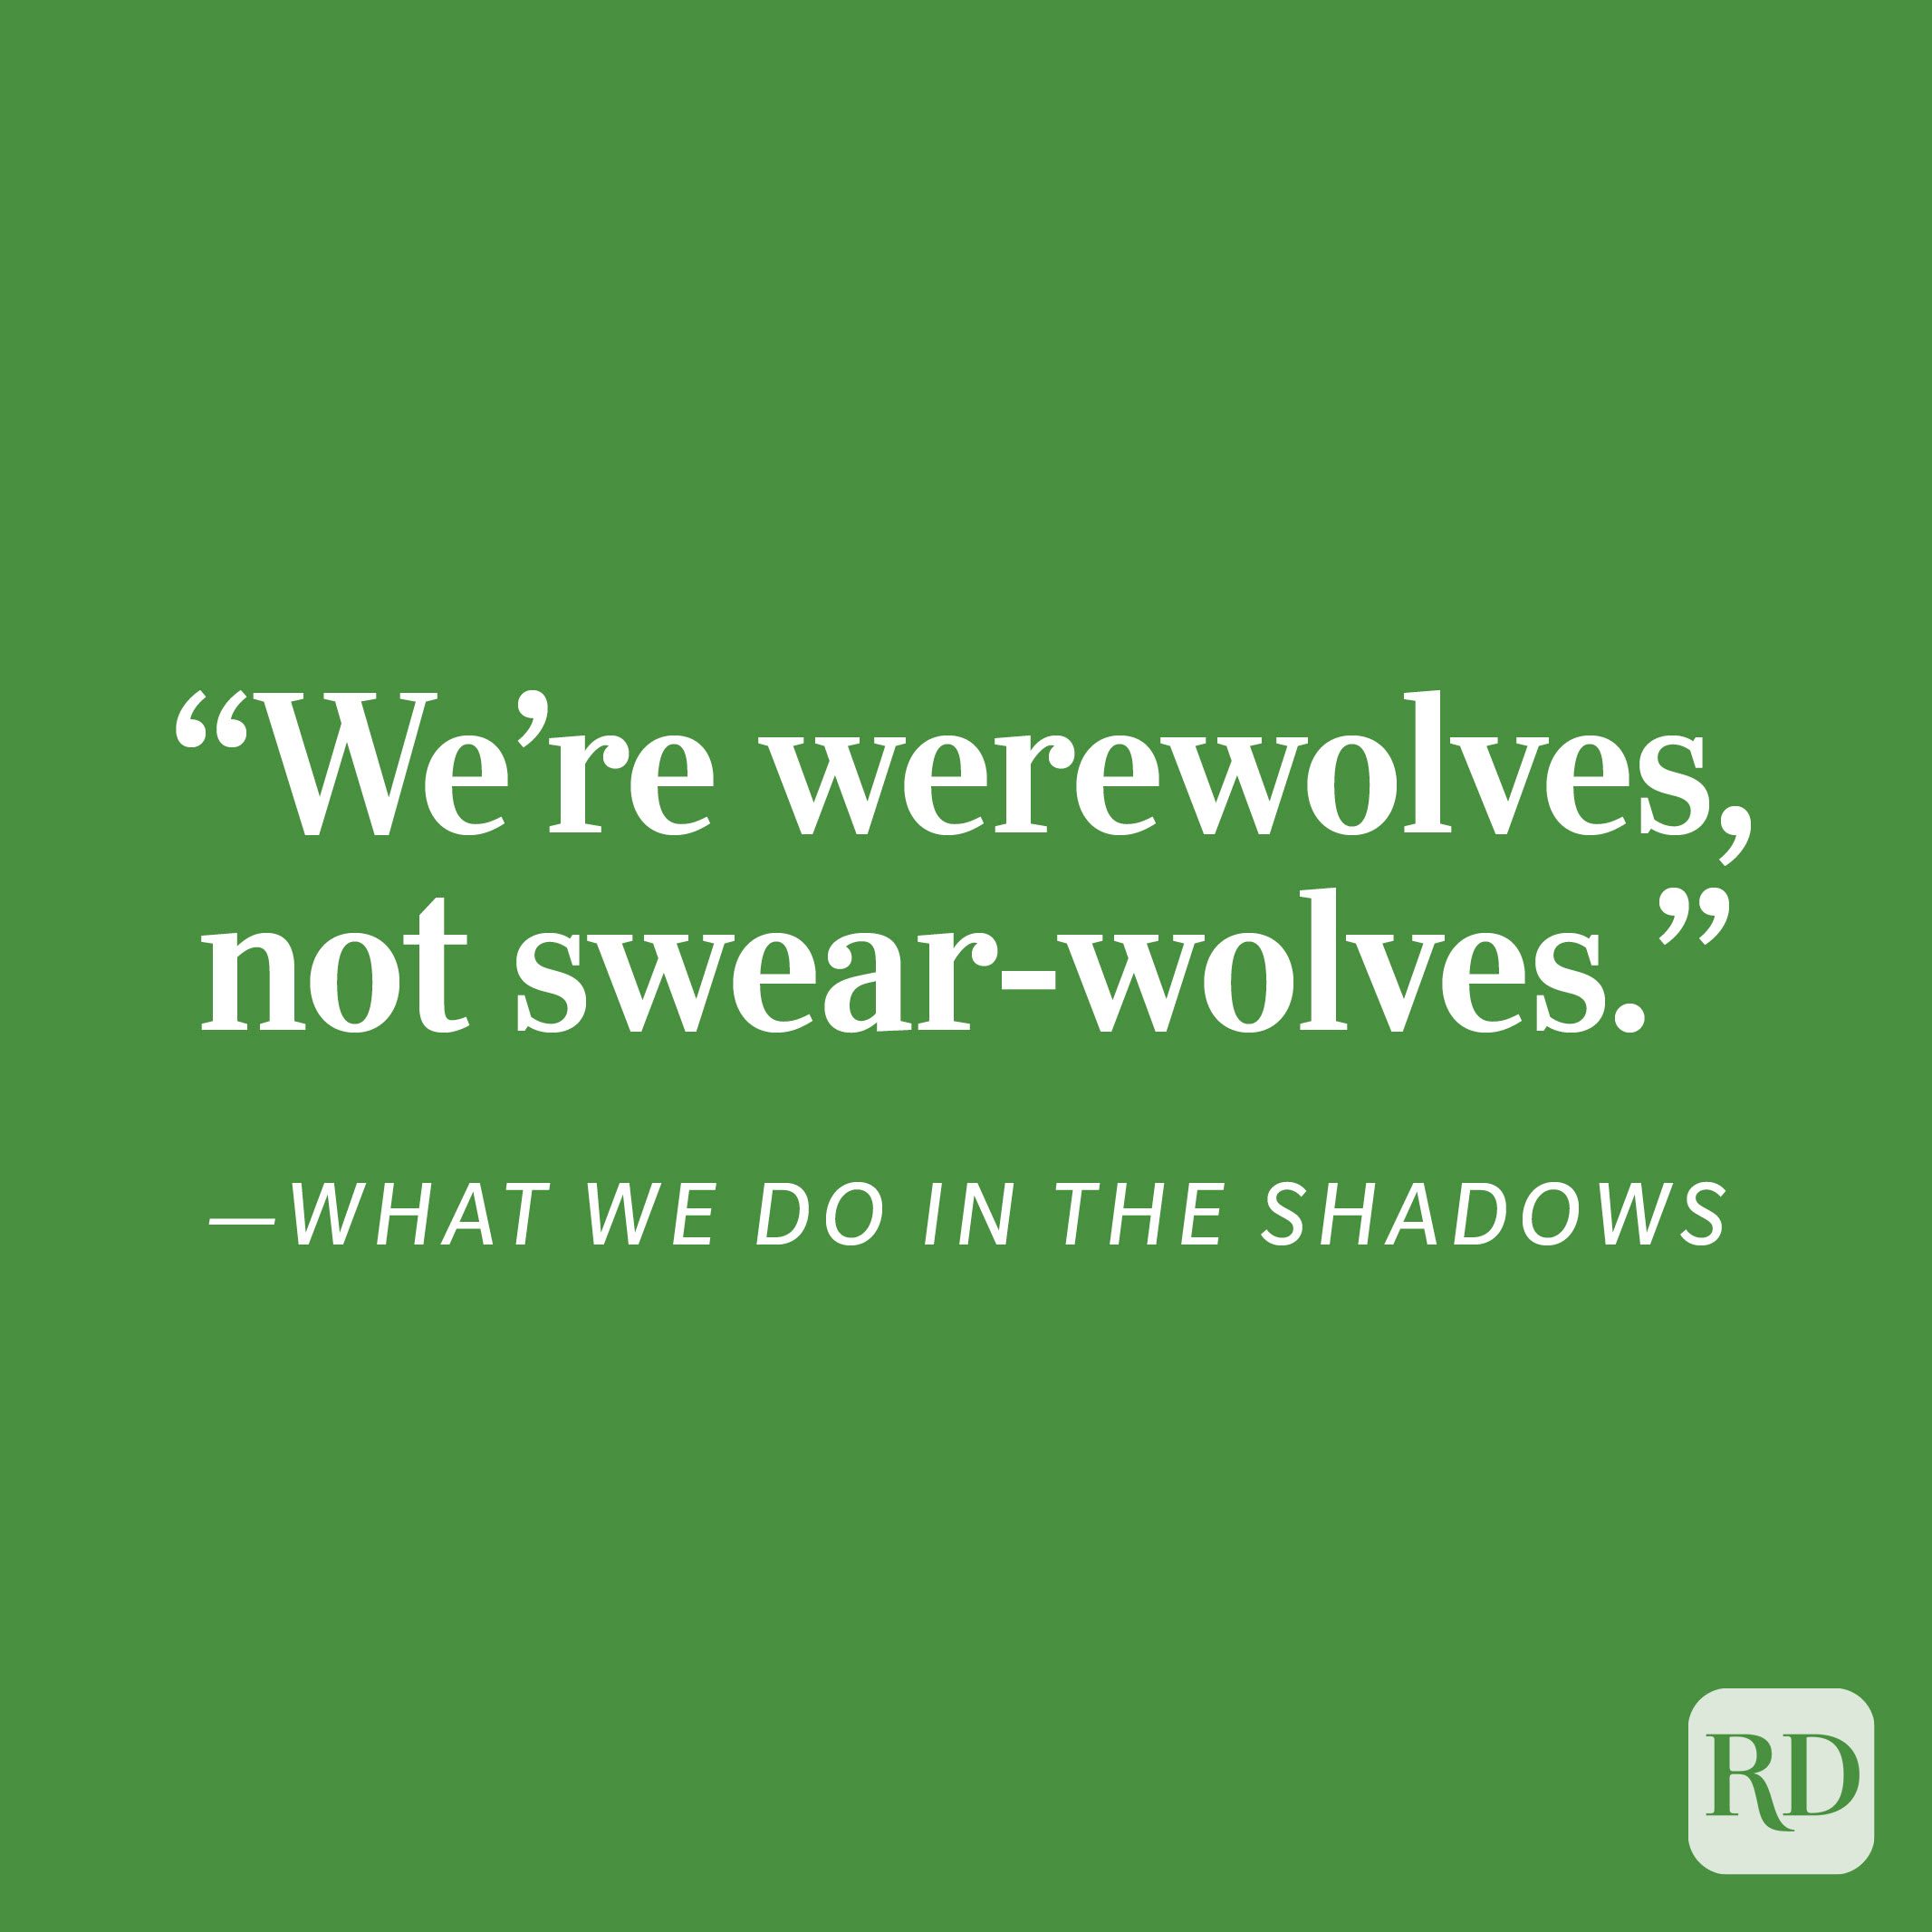 What We Do in the Shadows "We're werewolves, not swear-wolves"